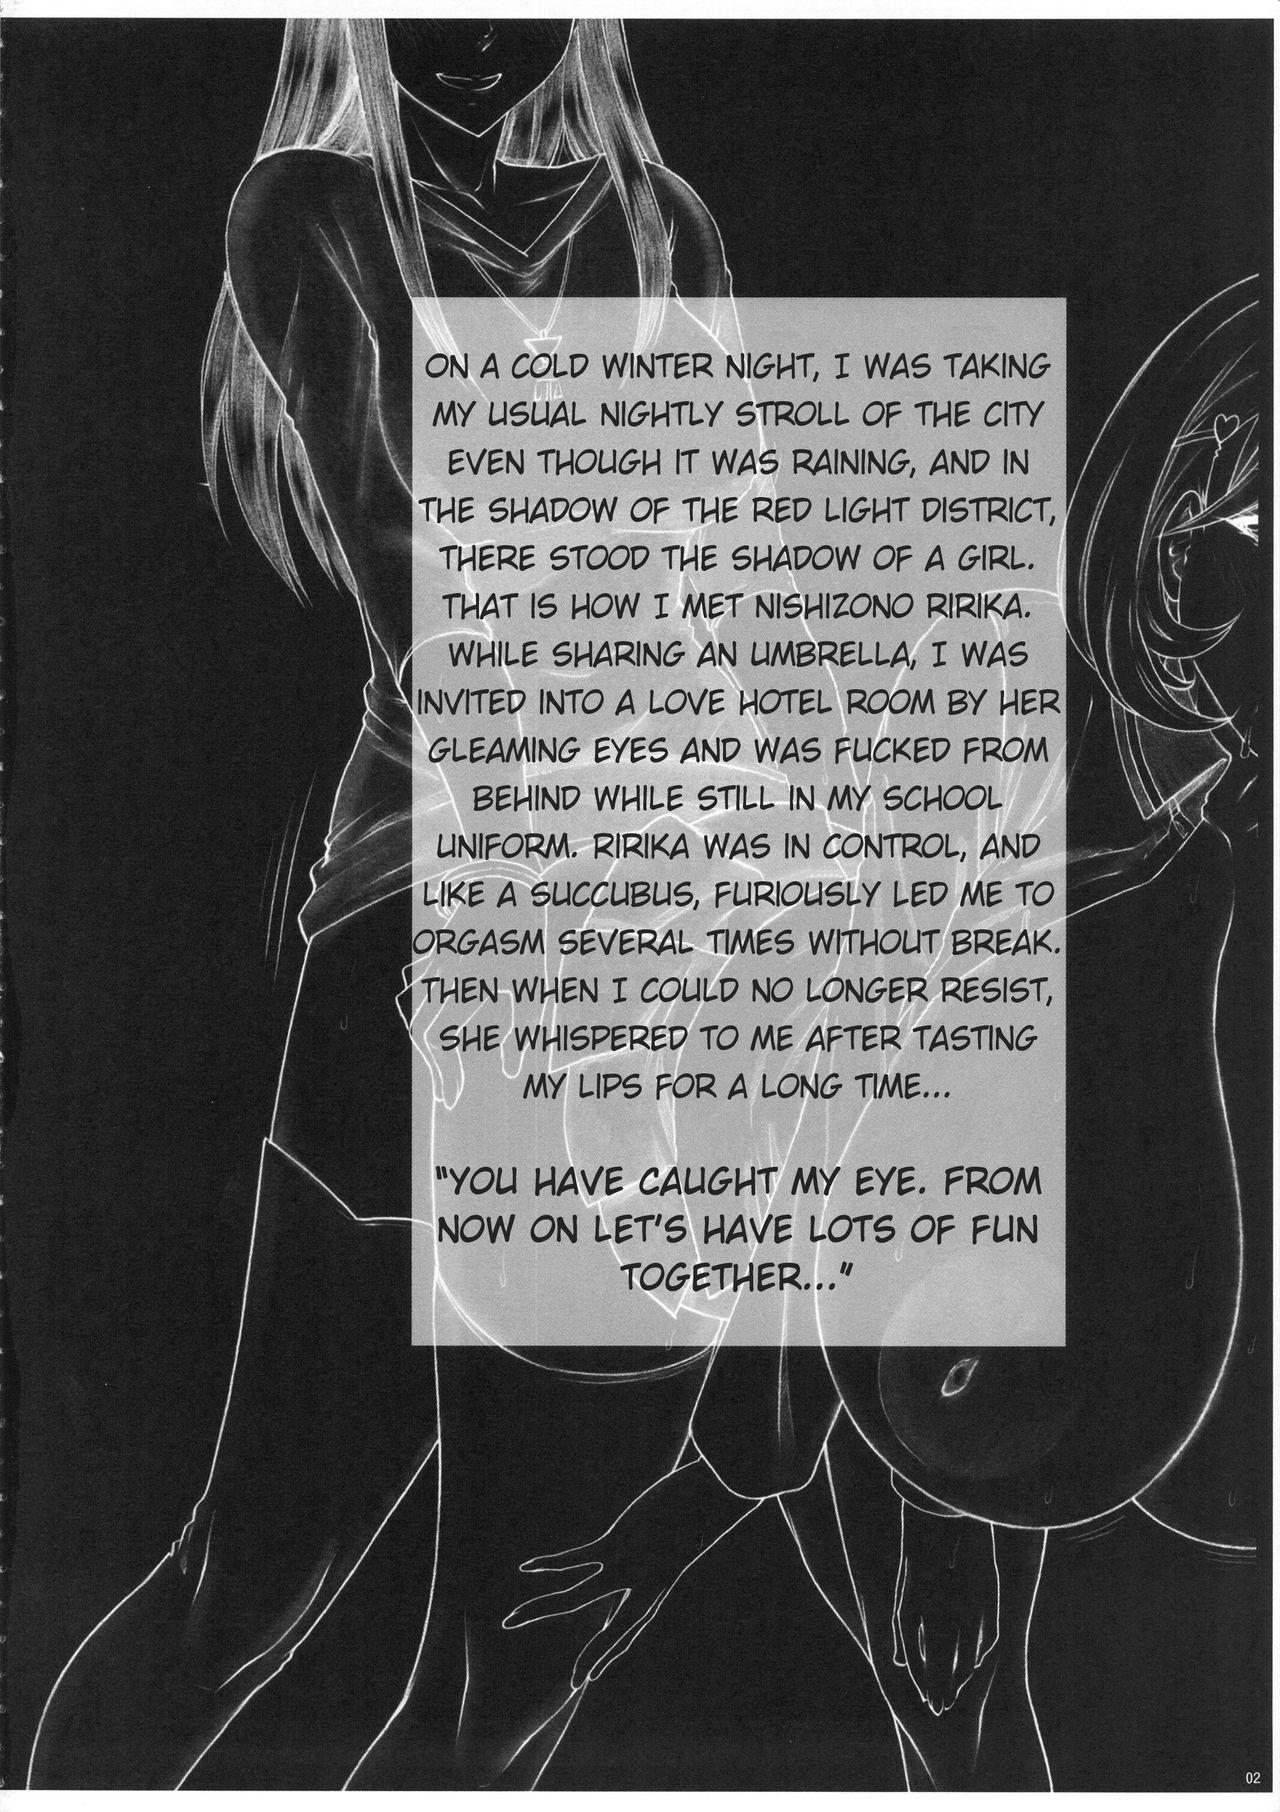 Behind Angel's Stroke 98 Occu Q - Occultic nine Anal Porn - Page 3